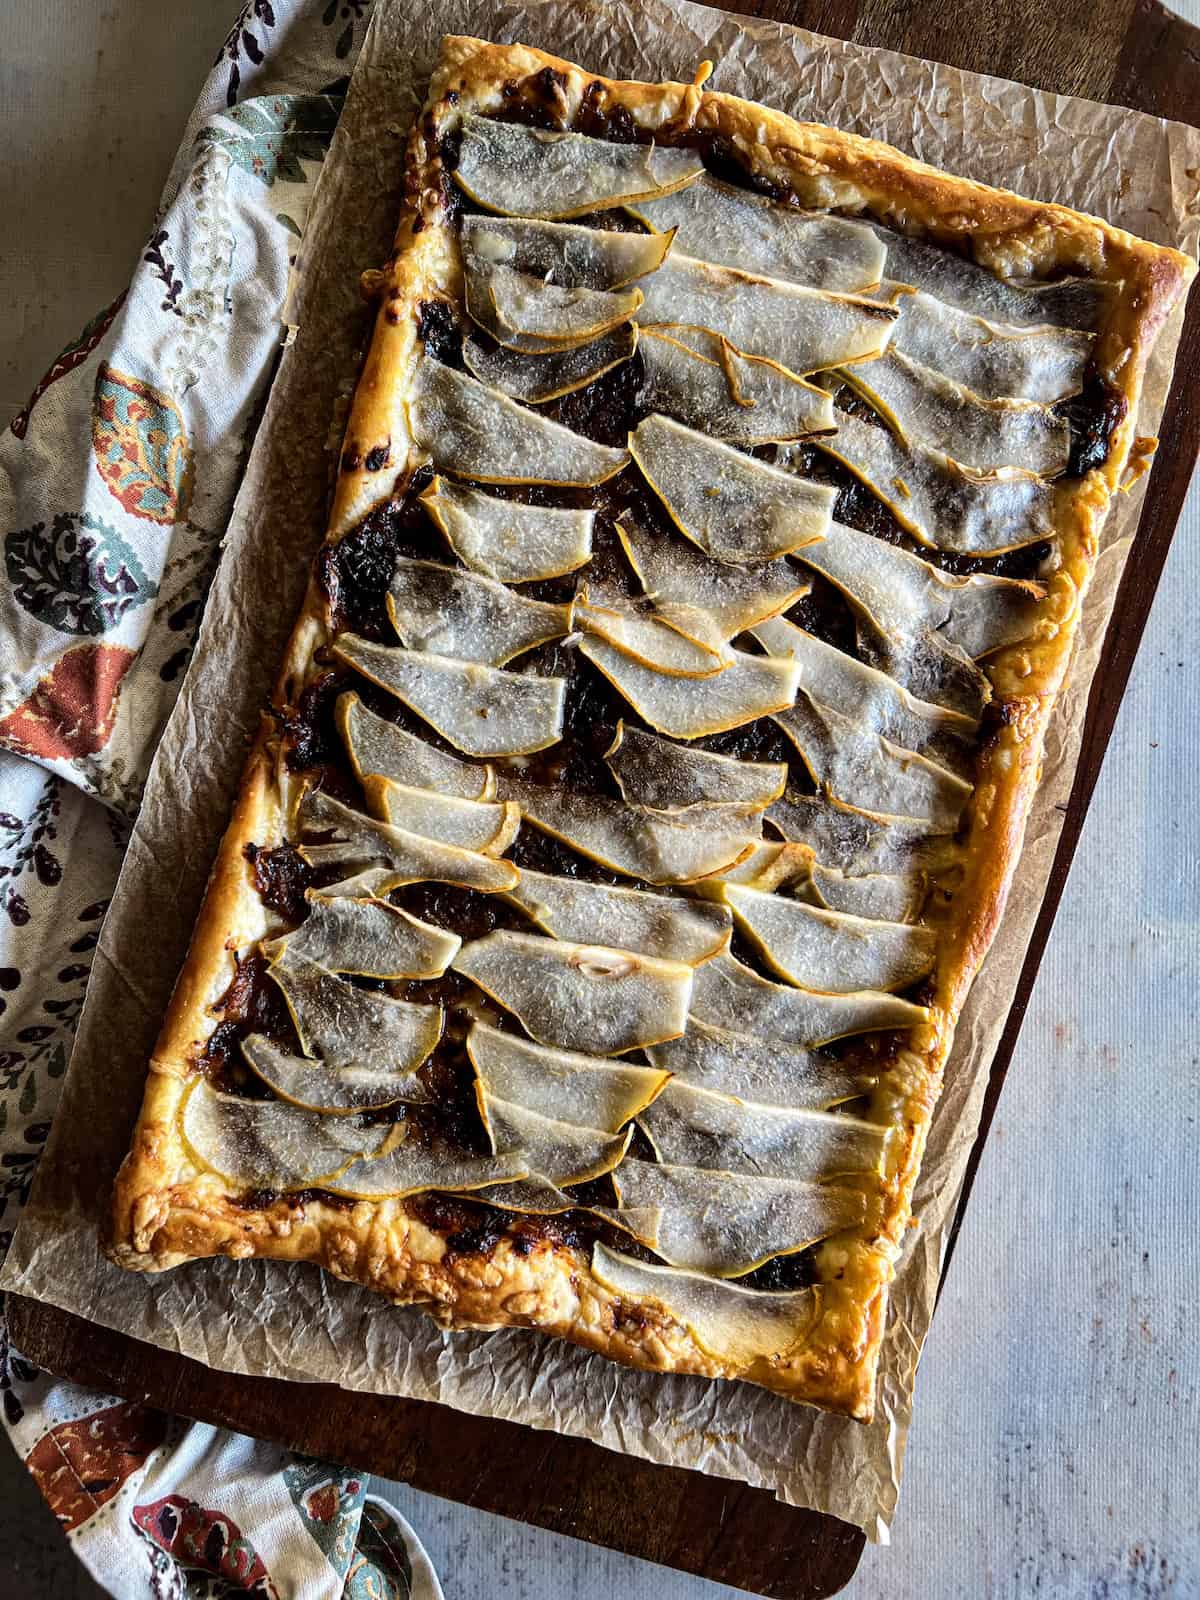 Pear, caramelized onion and prune tart on parchment paper on a wood board with a leaf patterned napkin.